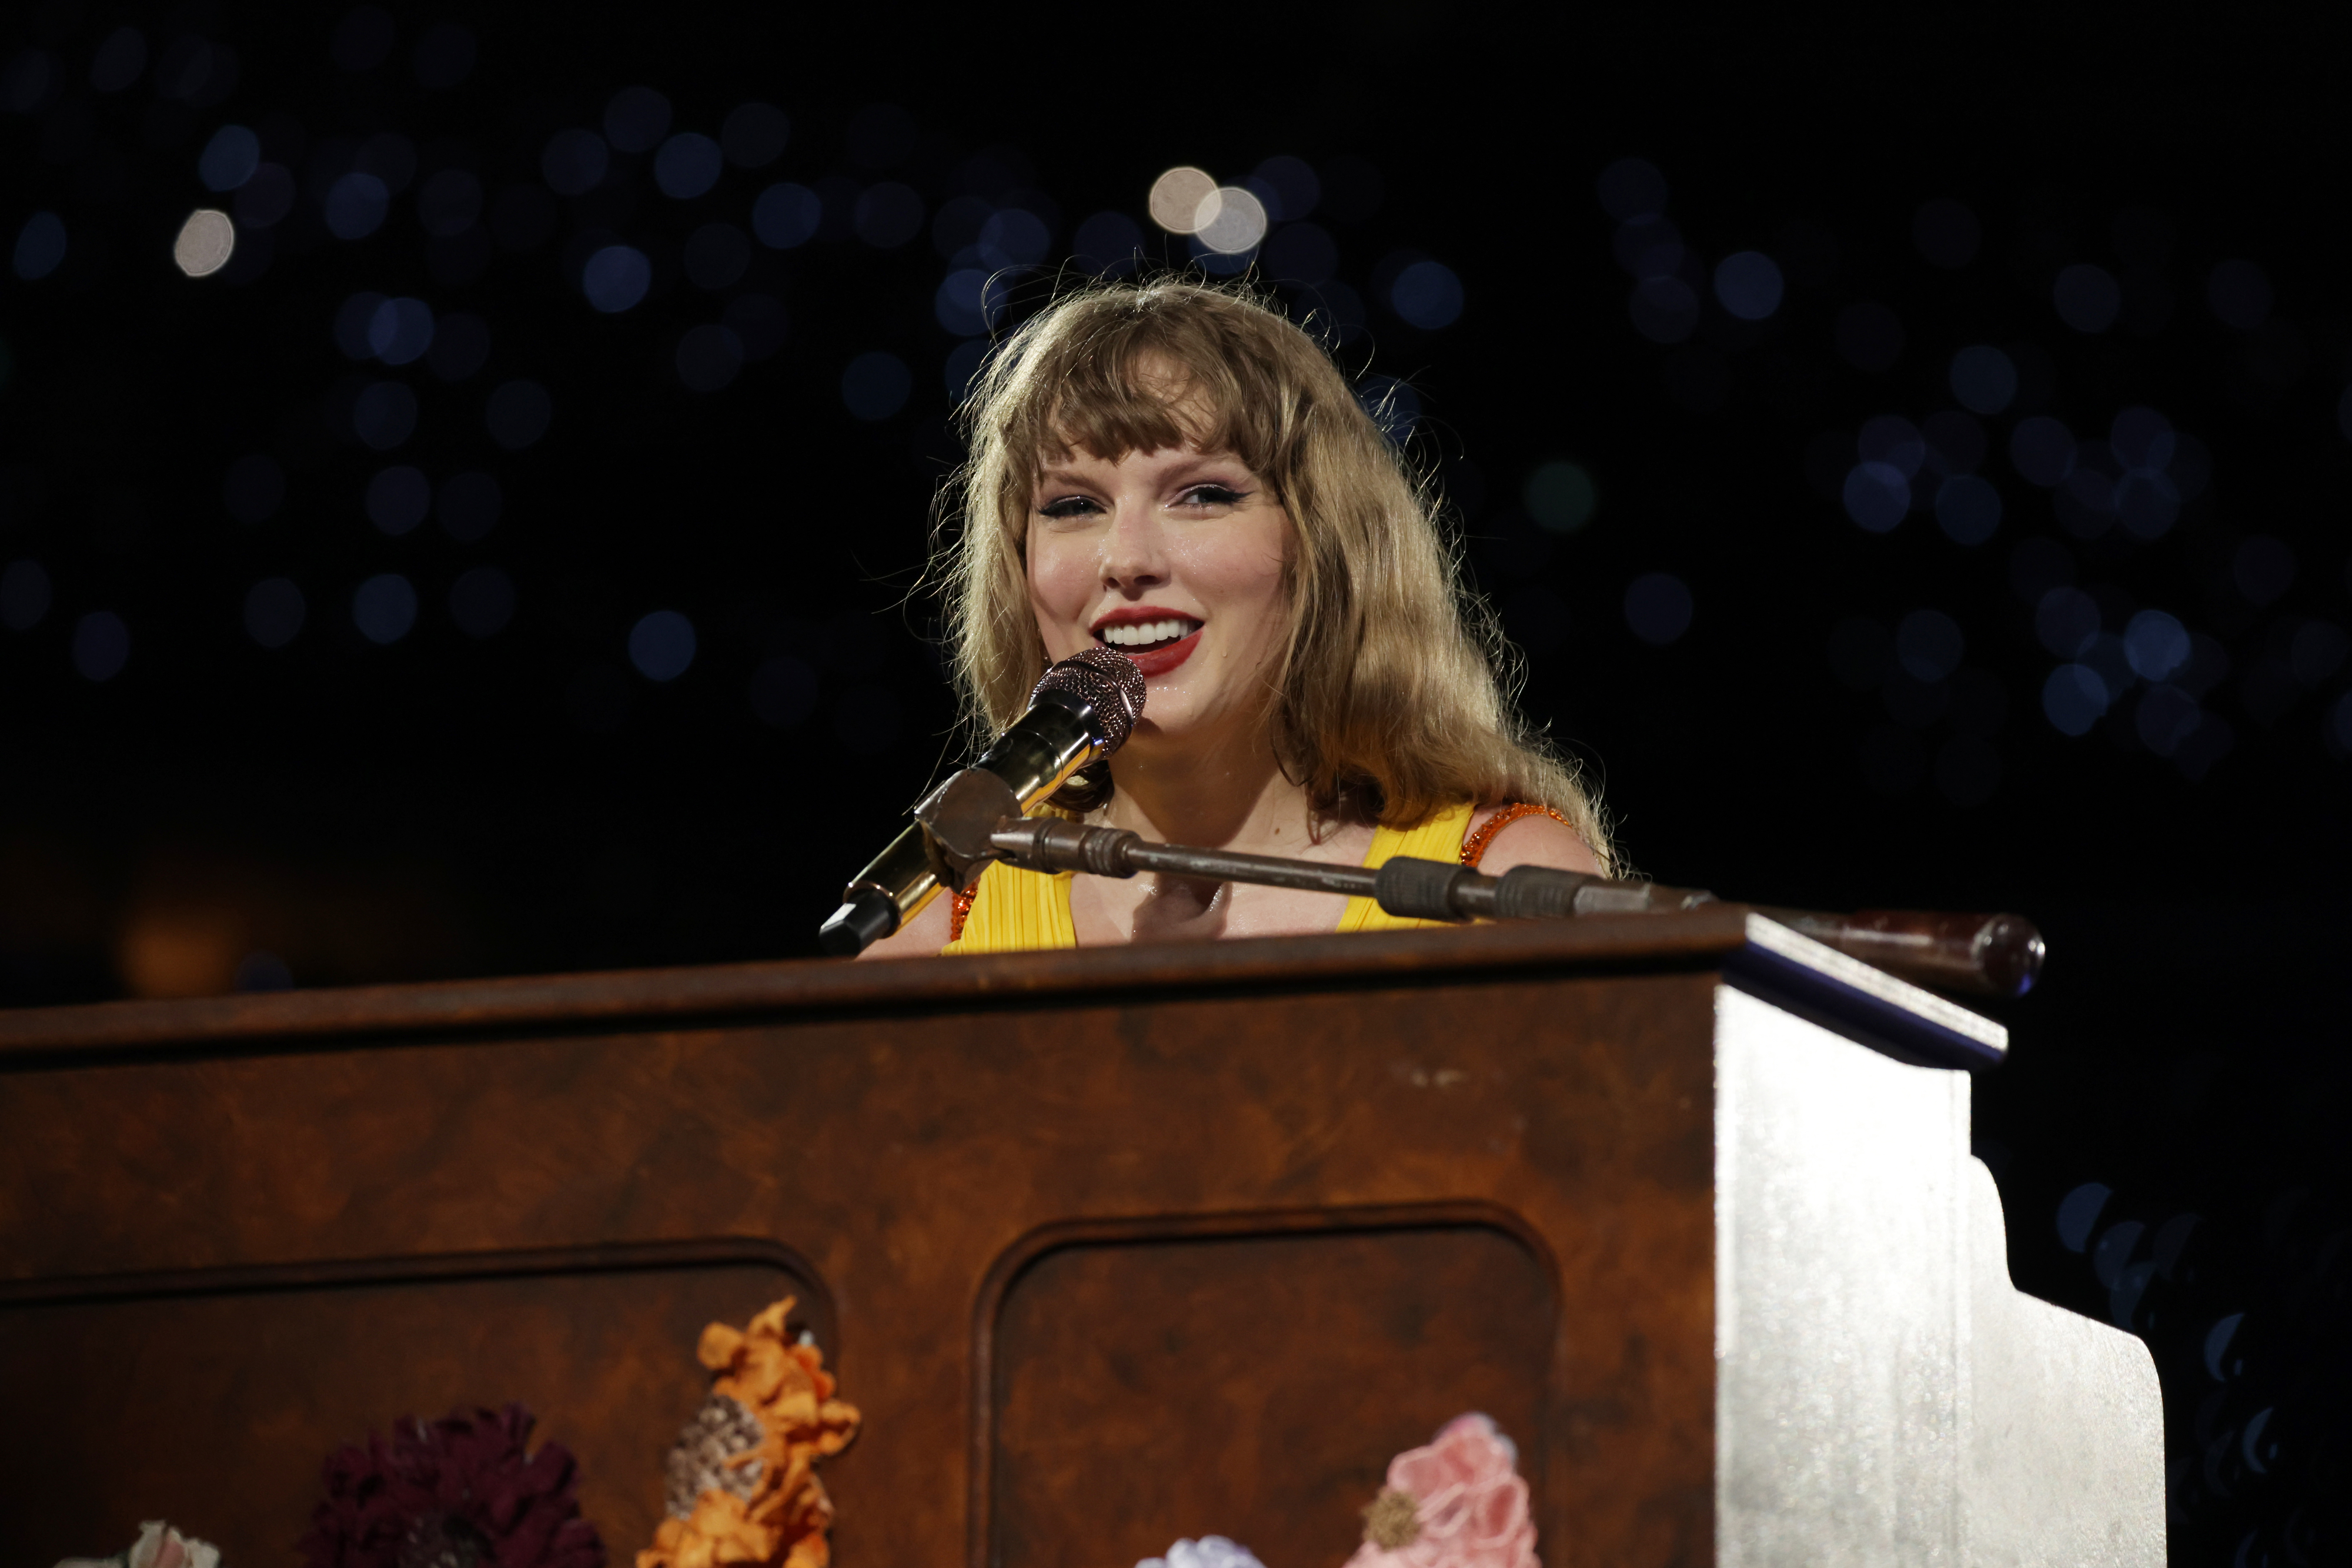 Taylor sitting at her piano on stage